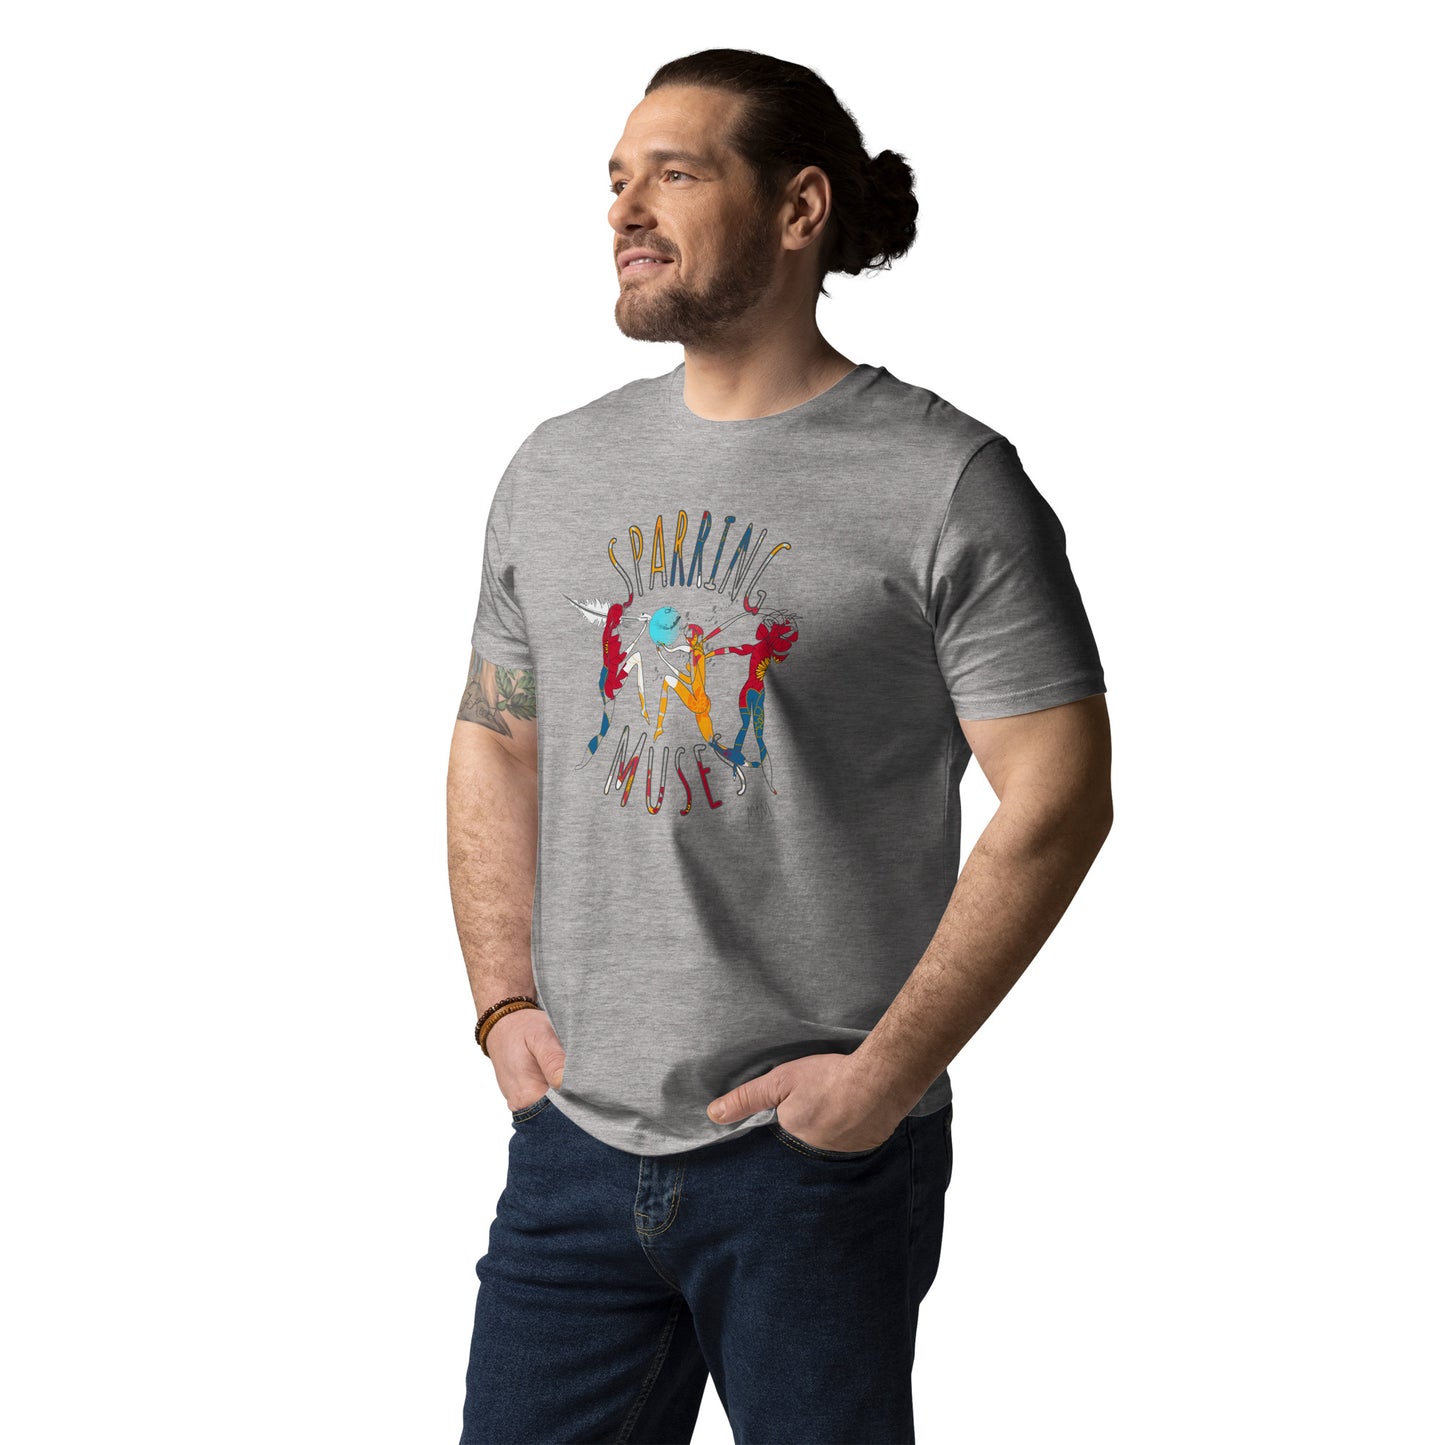 Sparring Muses: Unisex Organic Cotton T-Shirt